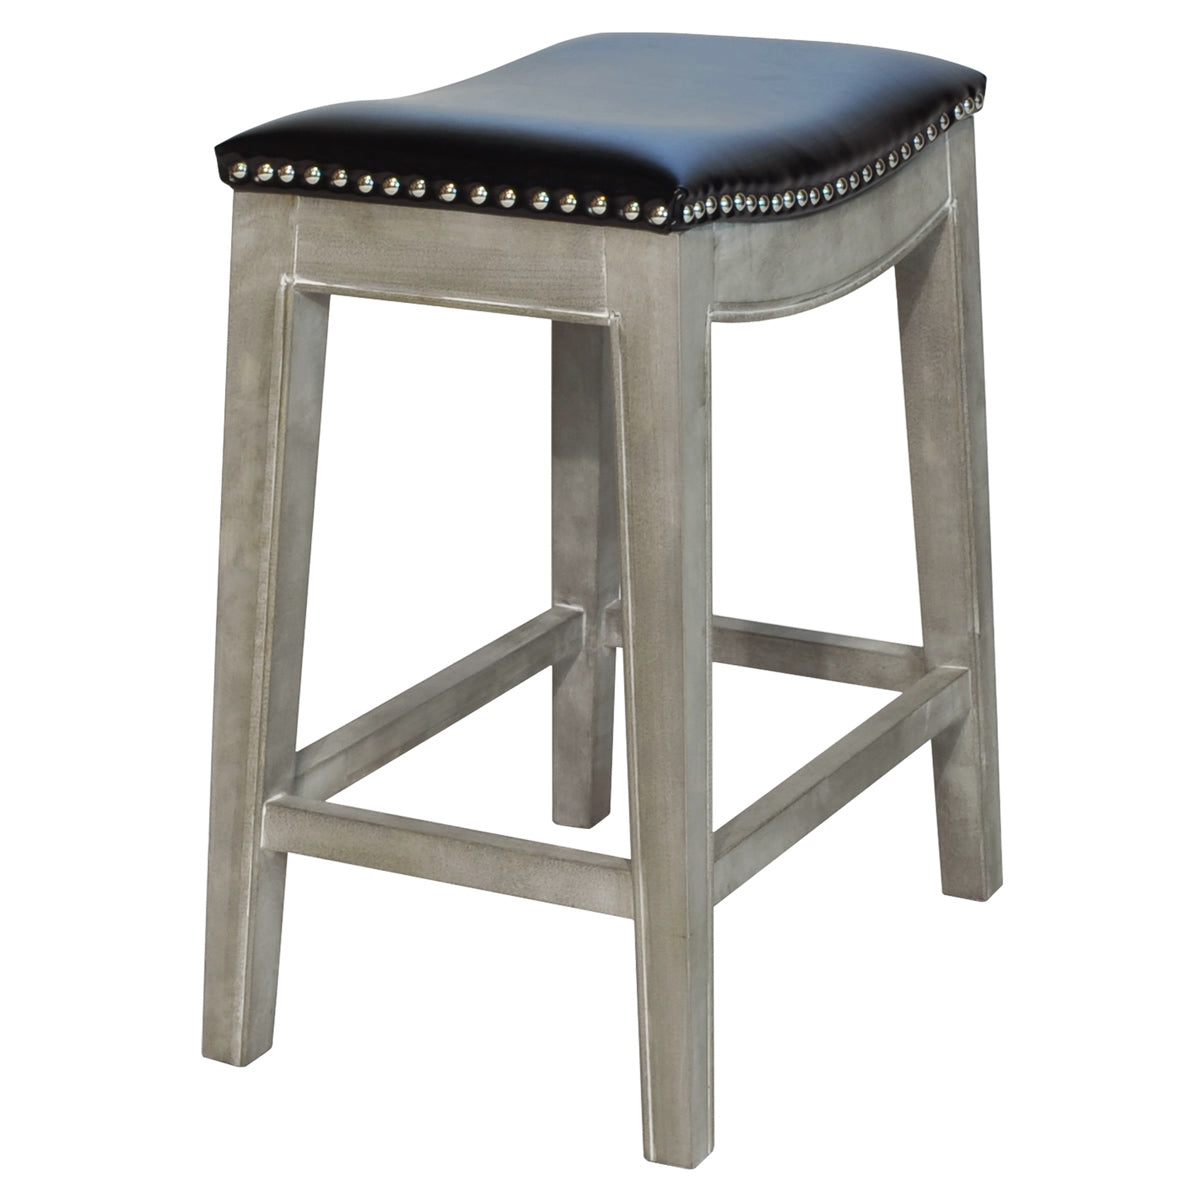 Elmo Bonded Leather Counter Stool by New Pacific Direct - 198625B